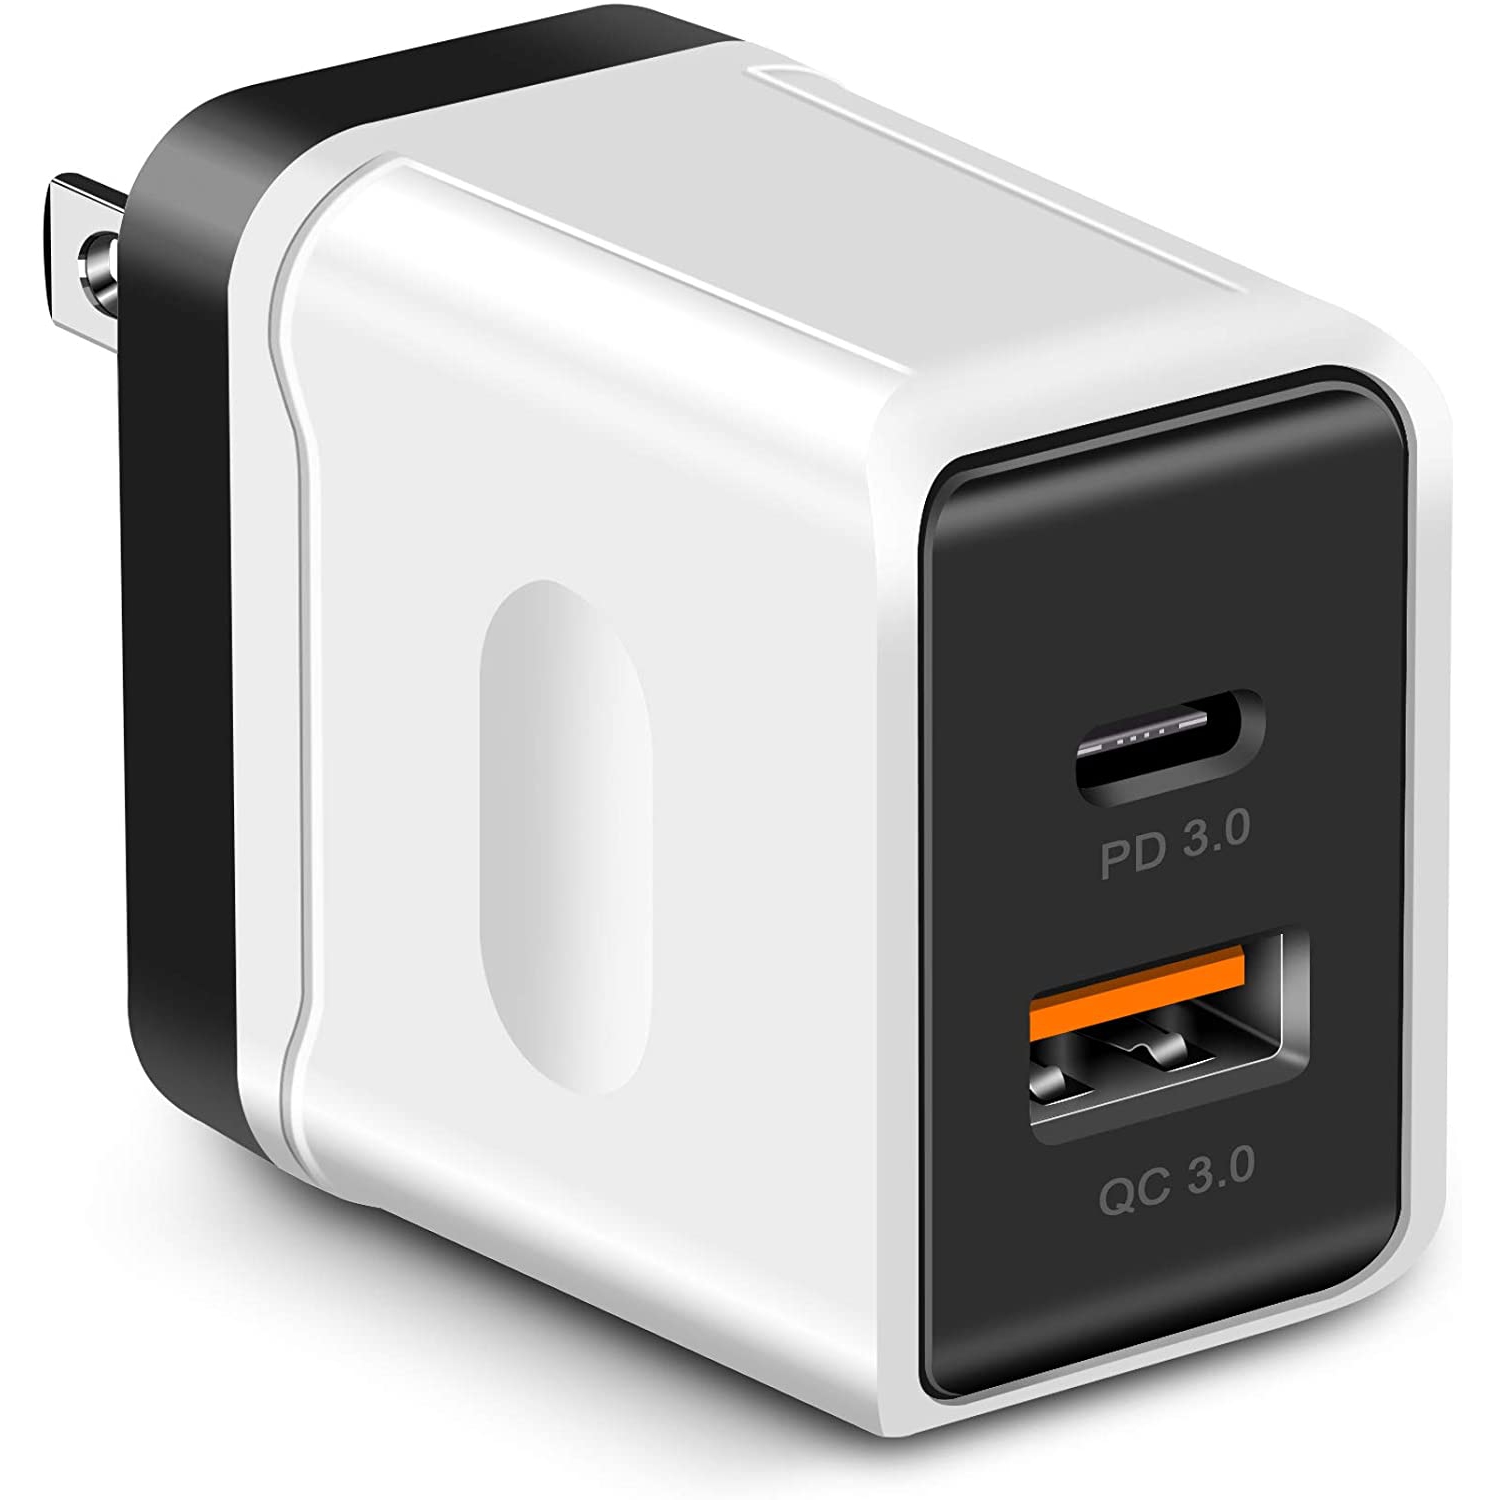 USB Wall Charger, 18W Quick Charge 3.0 USB Charger, PD Type-C Power Adapter, 2 Ports USB Charging Plug,